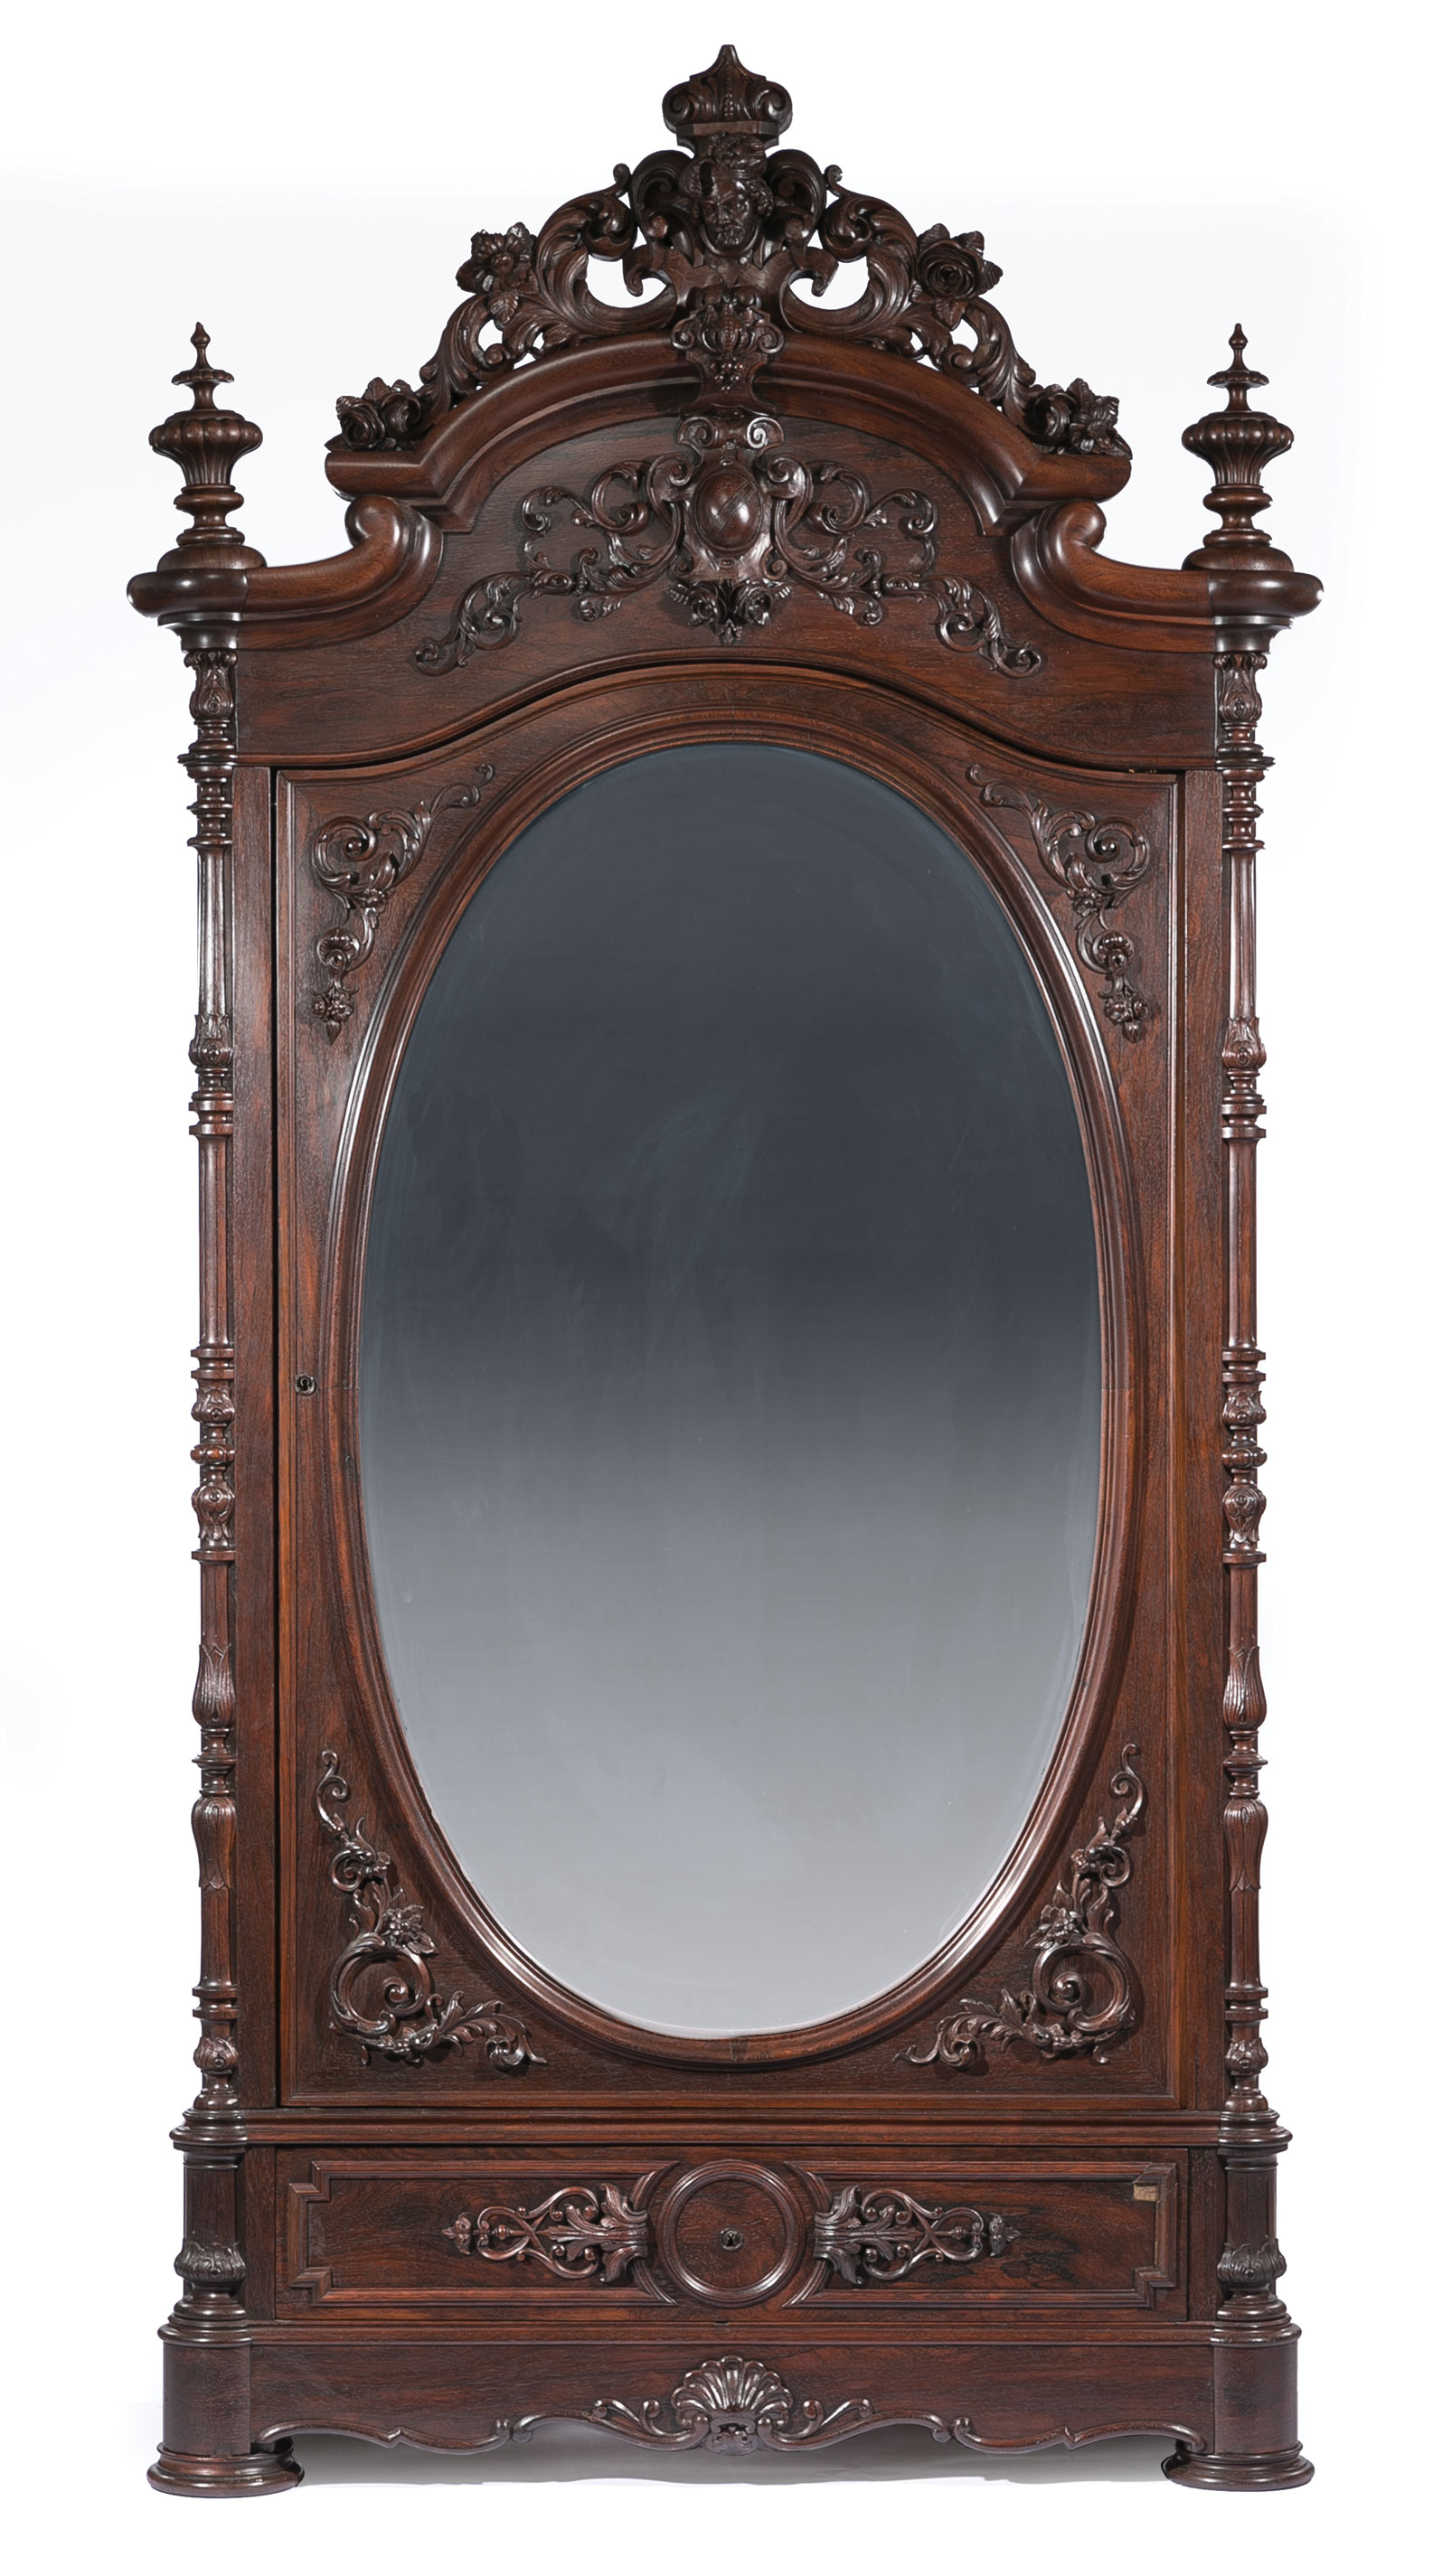 Very Fine American Carved Rosewood Bedroom Suite , mid-19th c., labeled A. (Alexander) Roux, incl. - Image 8 of 20